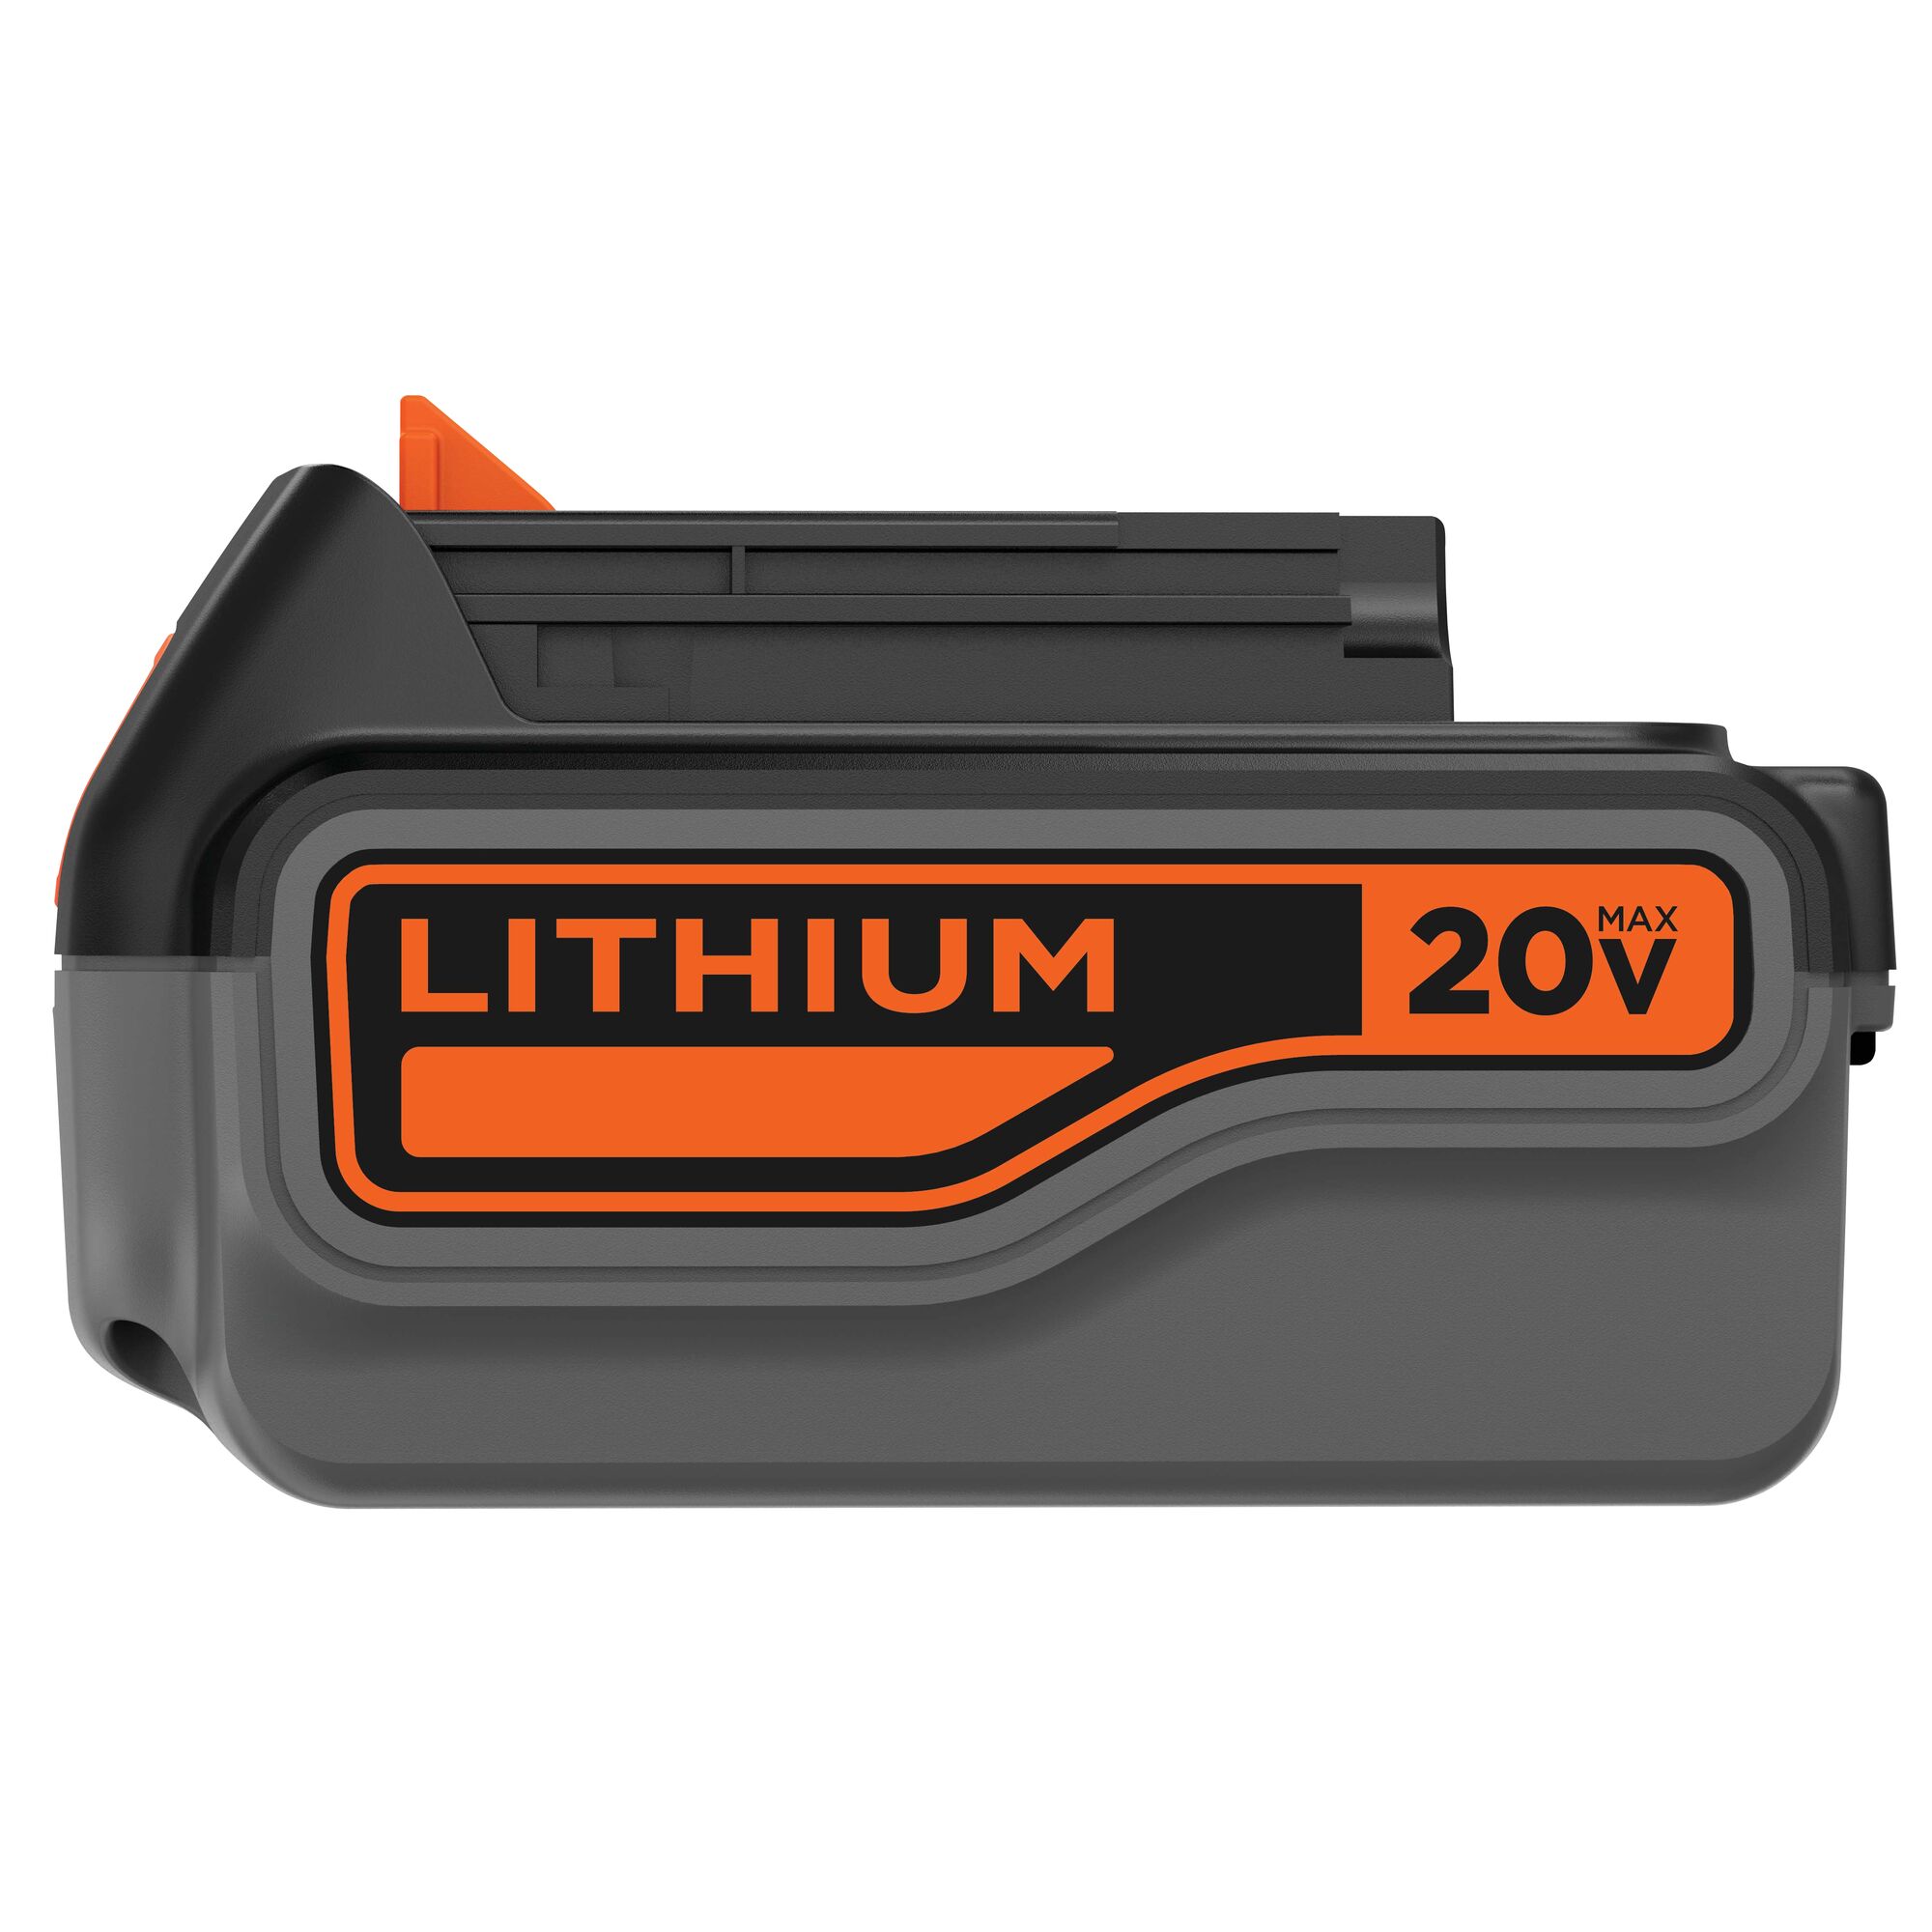 20 volts MAX 3.0 Amp hours\r\nLithium ion battery.